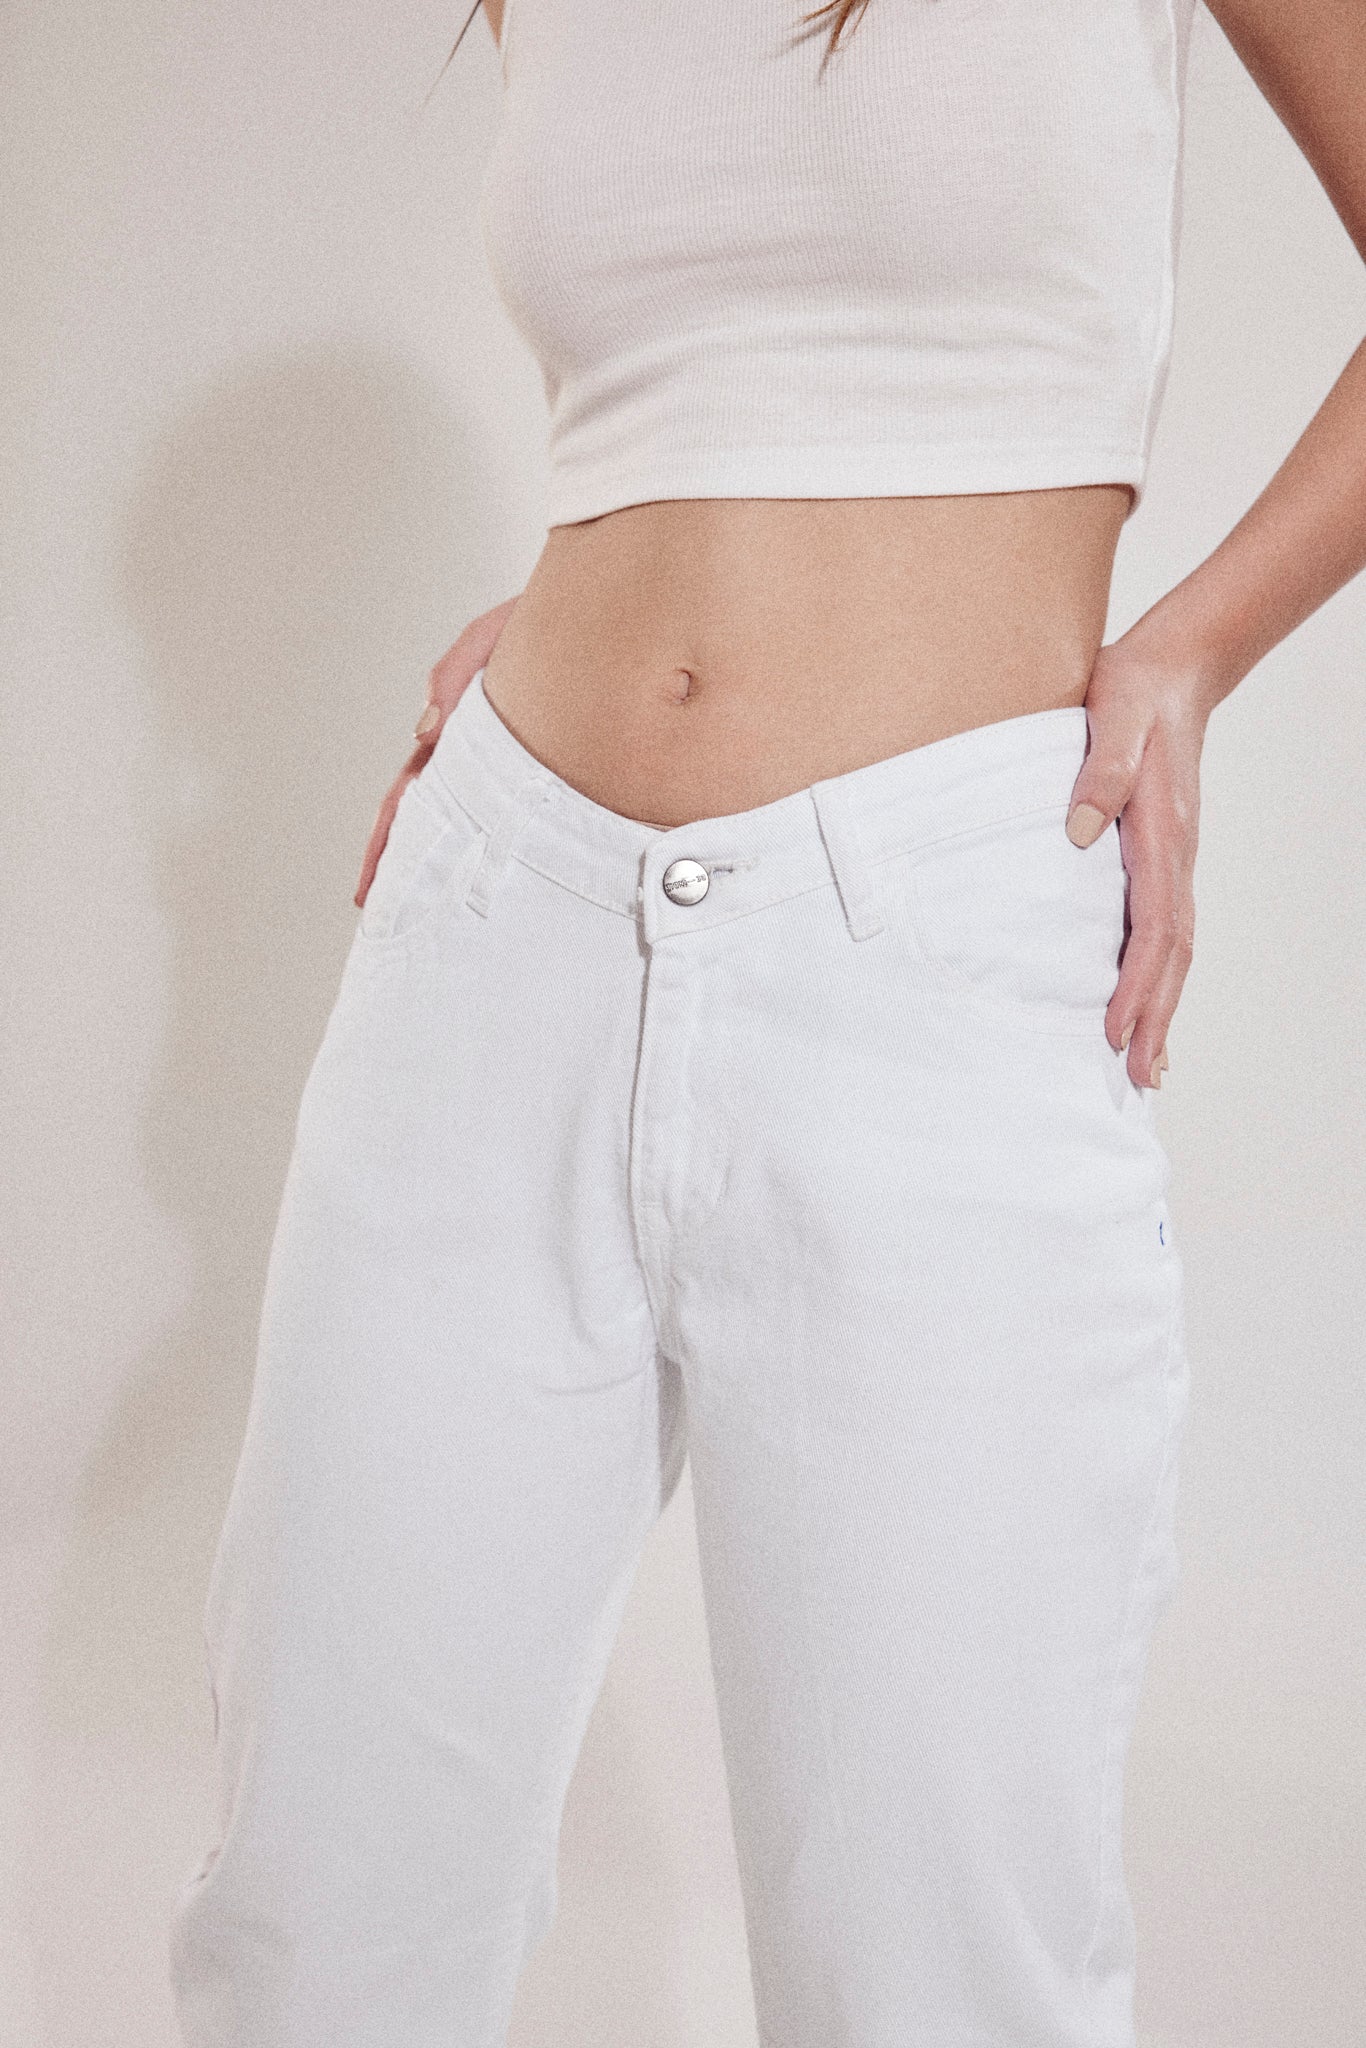 Be Edgy - V cut Jeans - White